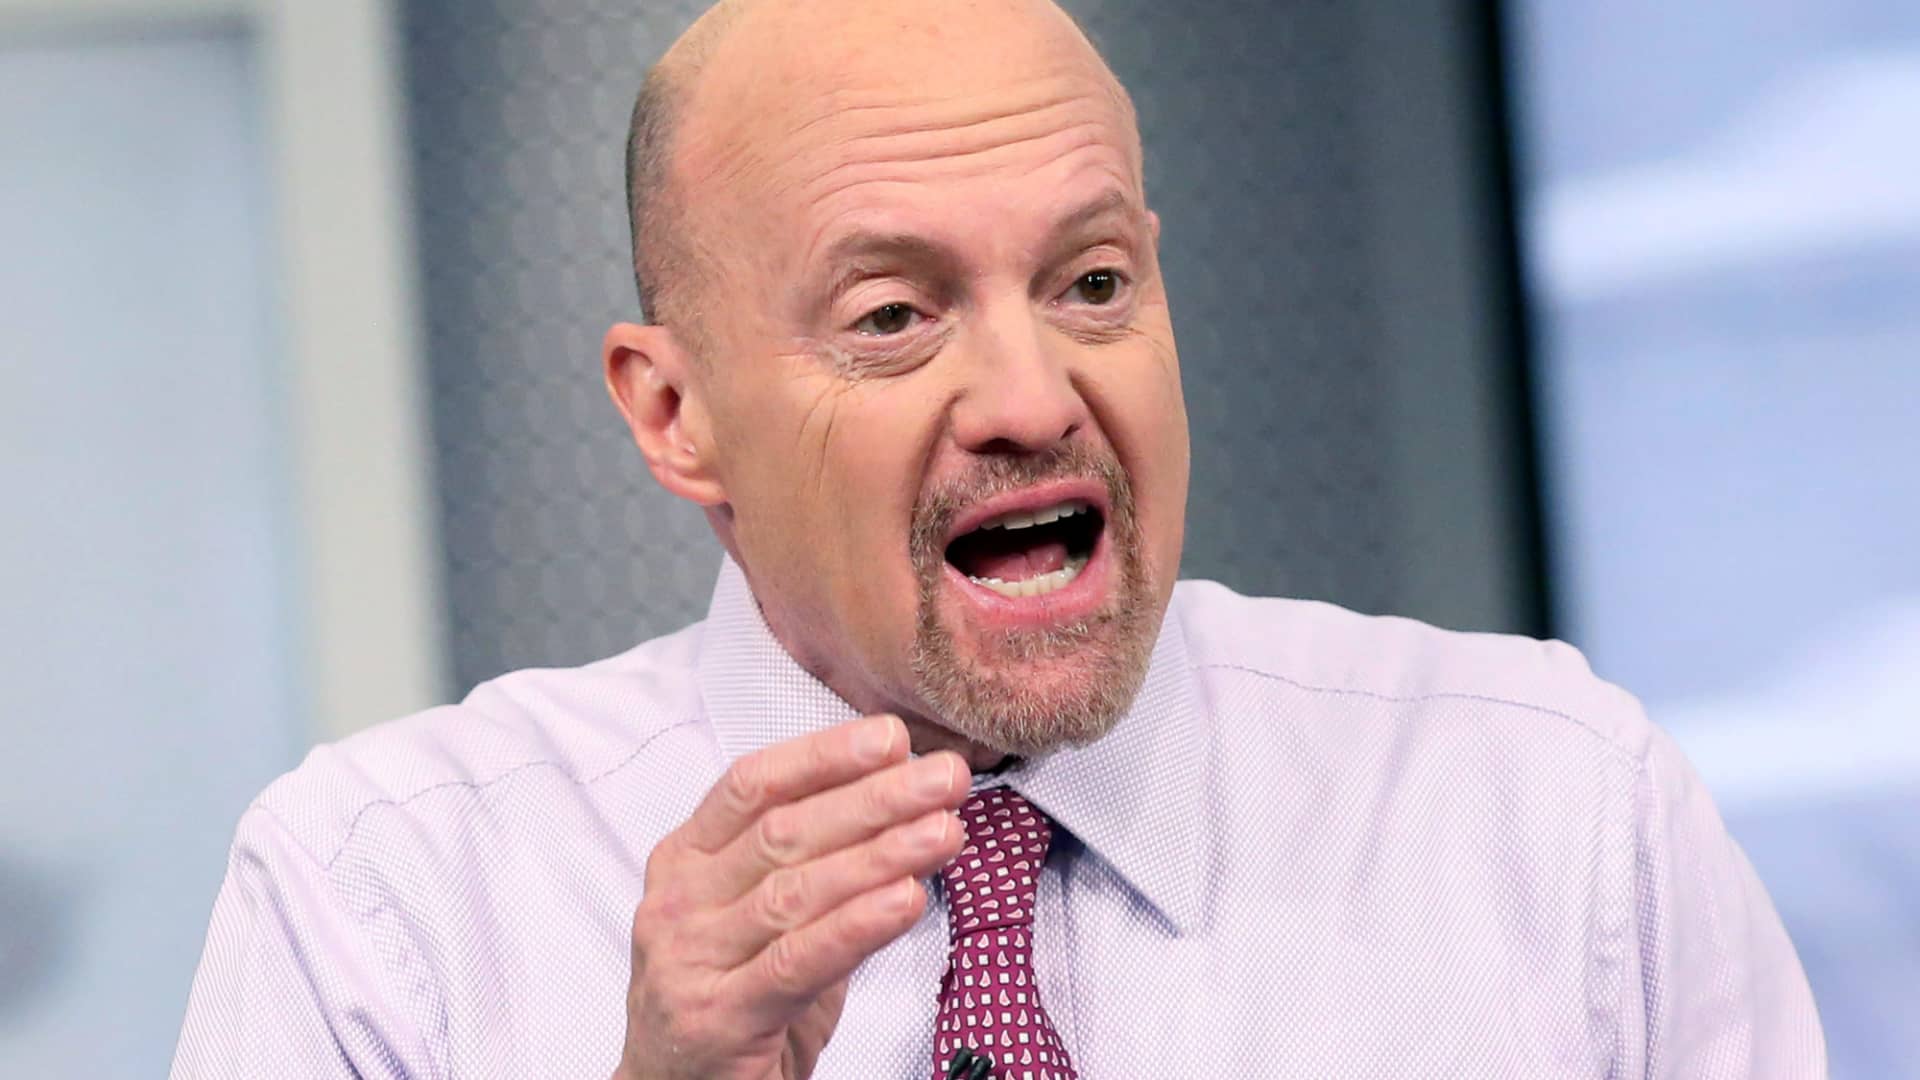 Charts suggest the euro could see a ‘swift rally’ and lift the market with it, says Jim Cramer